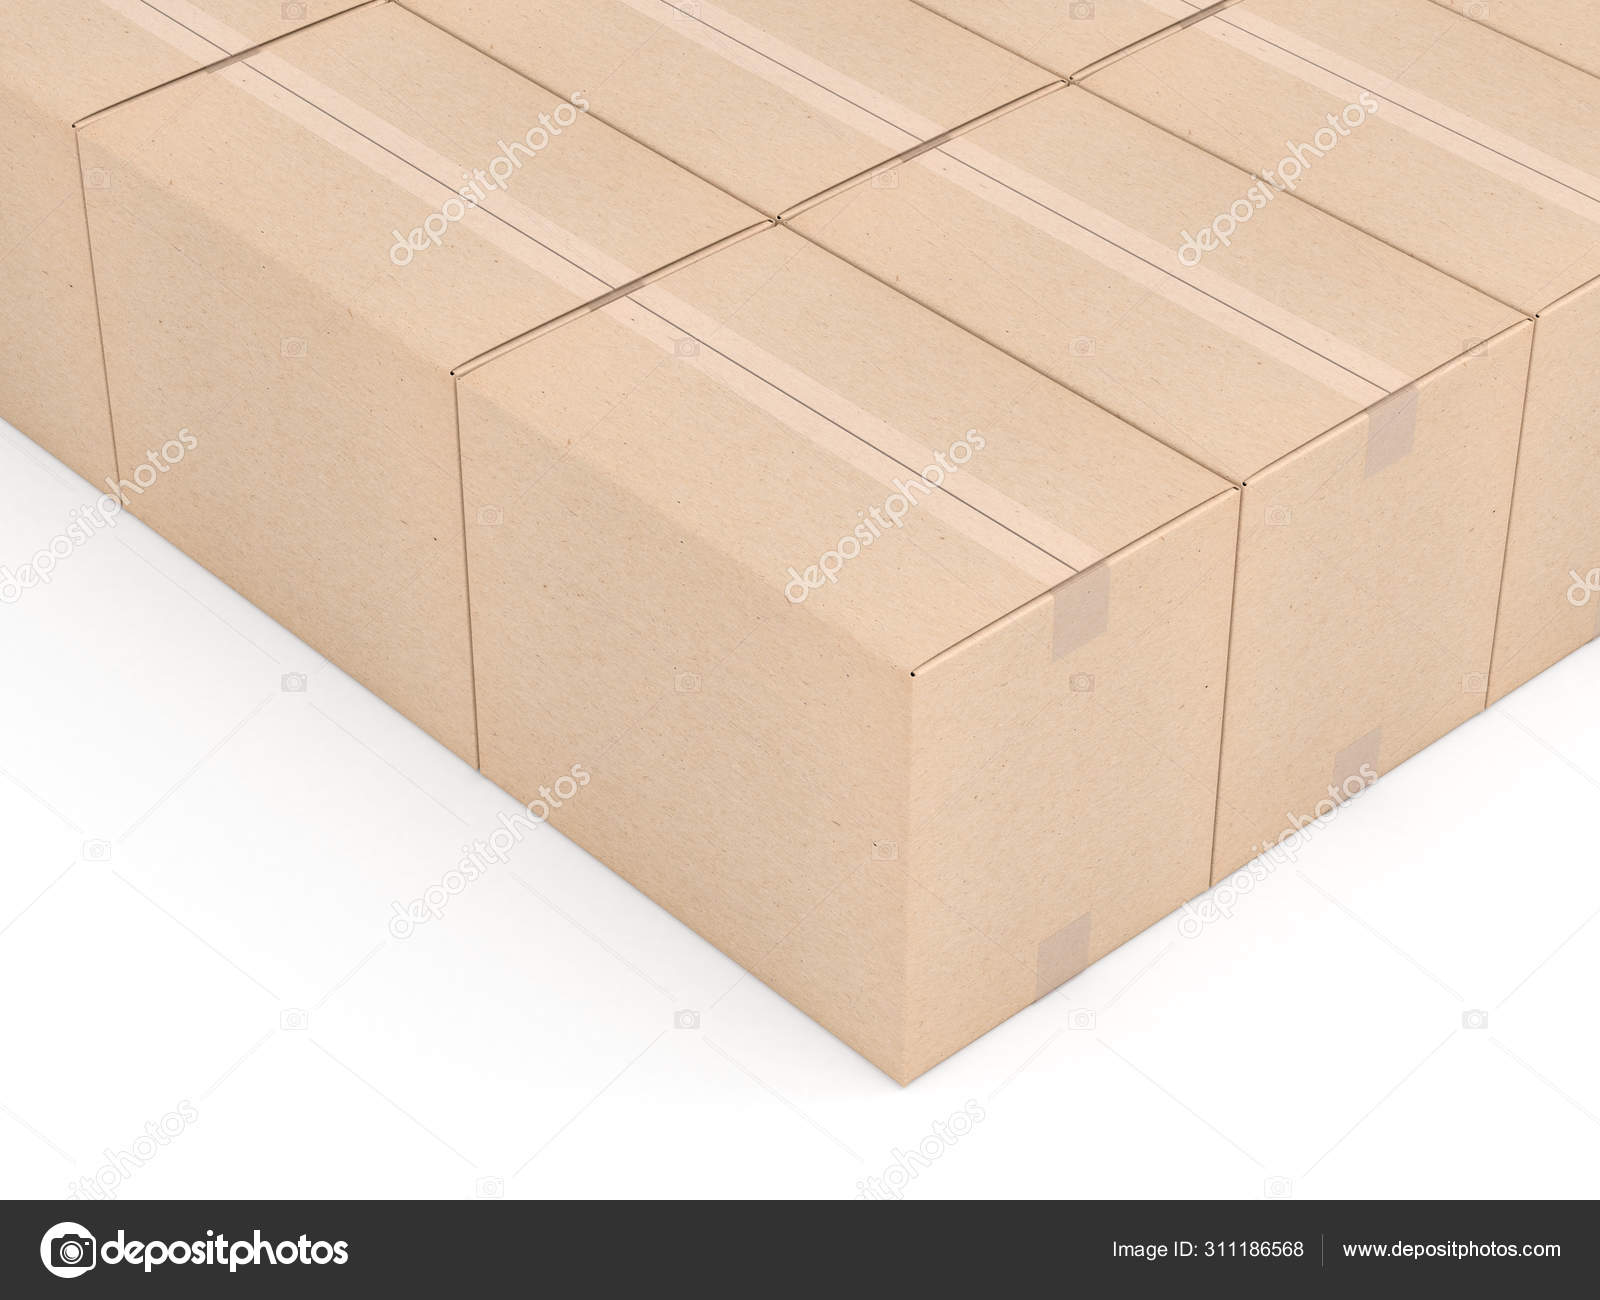 Download Cardboard Boxes Mockup Scotch Tape Rendering Stock Photo Image By C Customdesigner 311186568